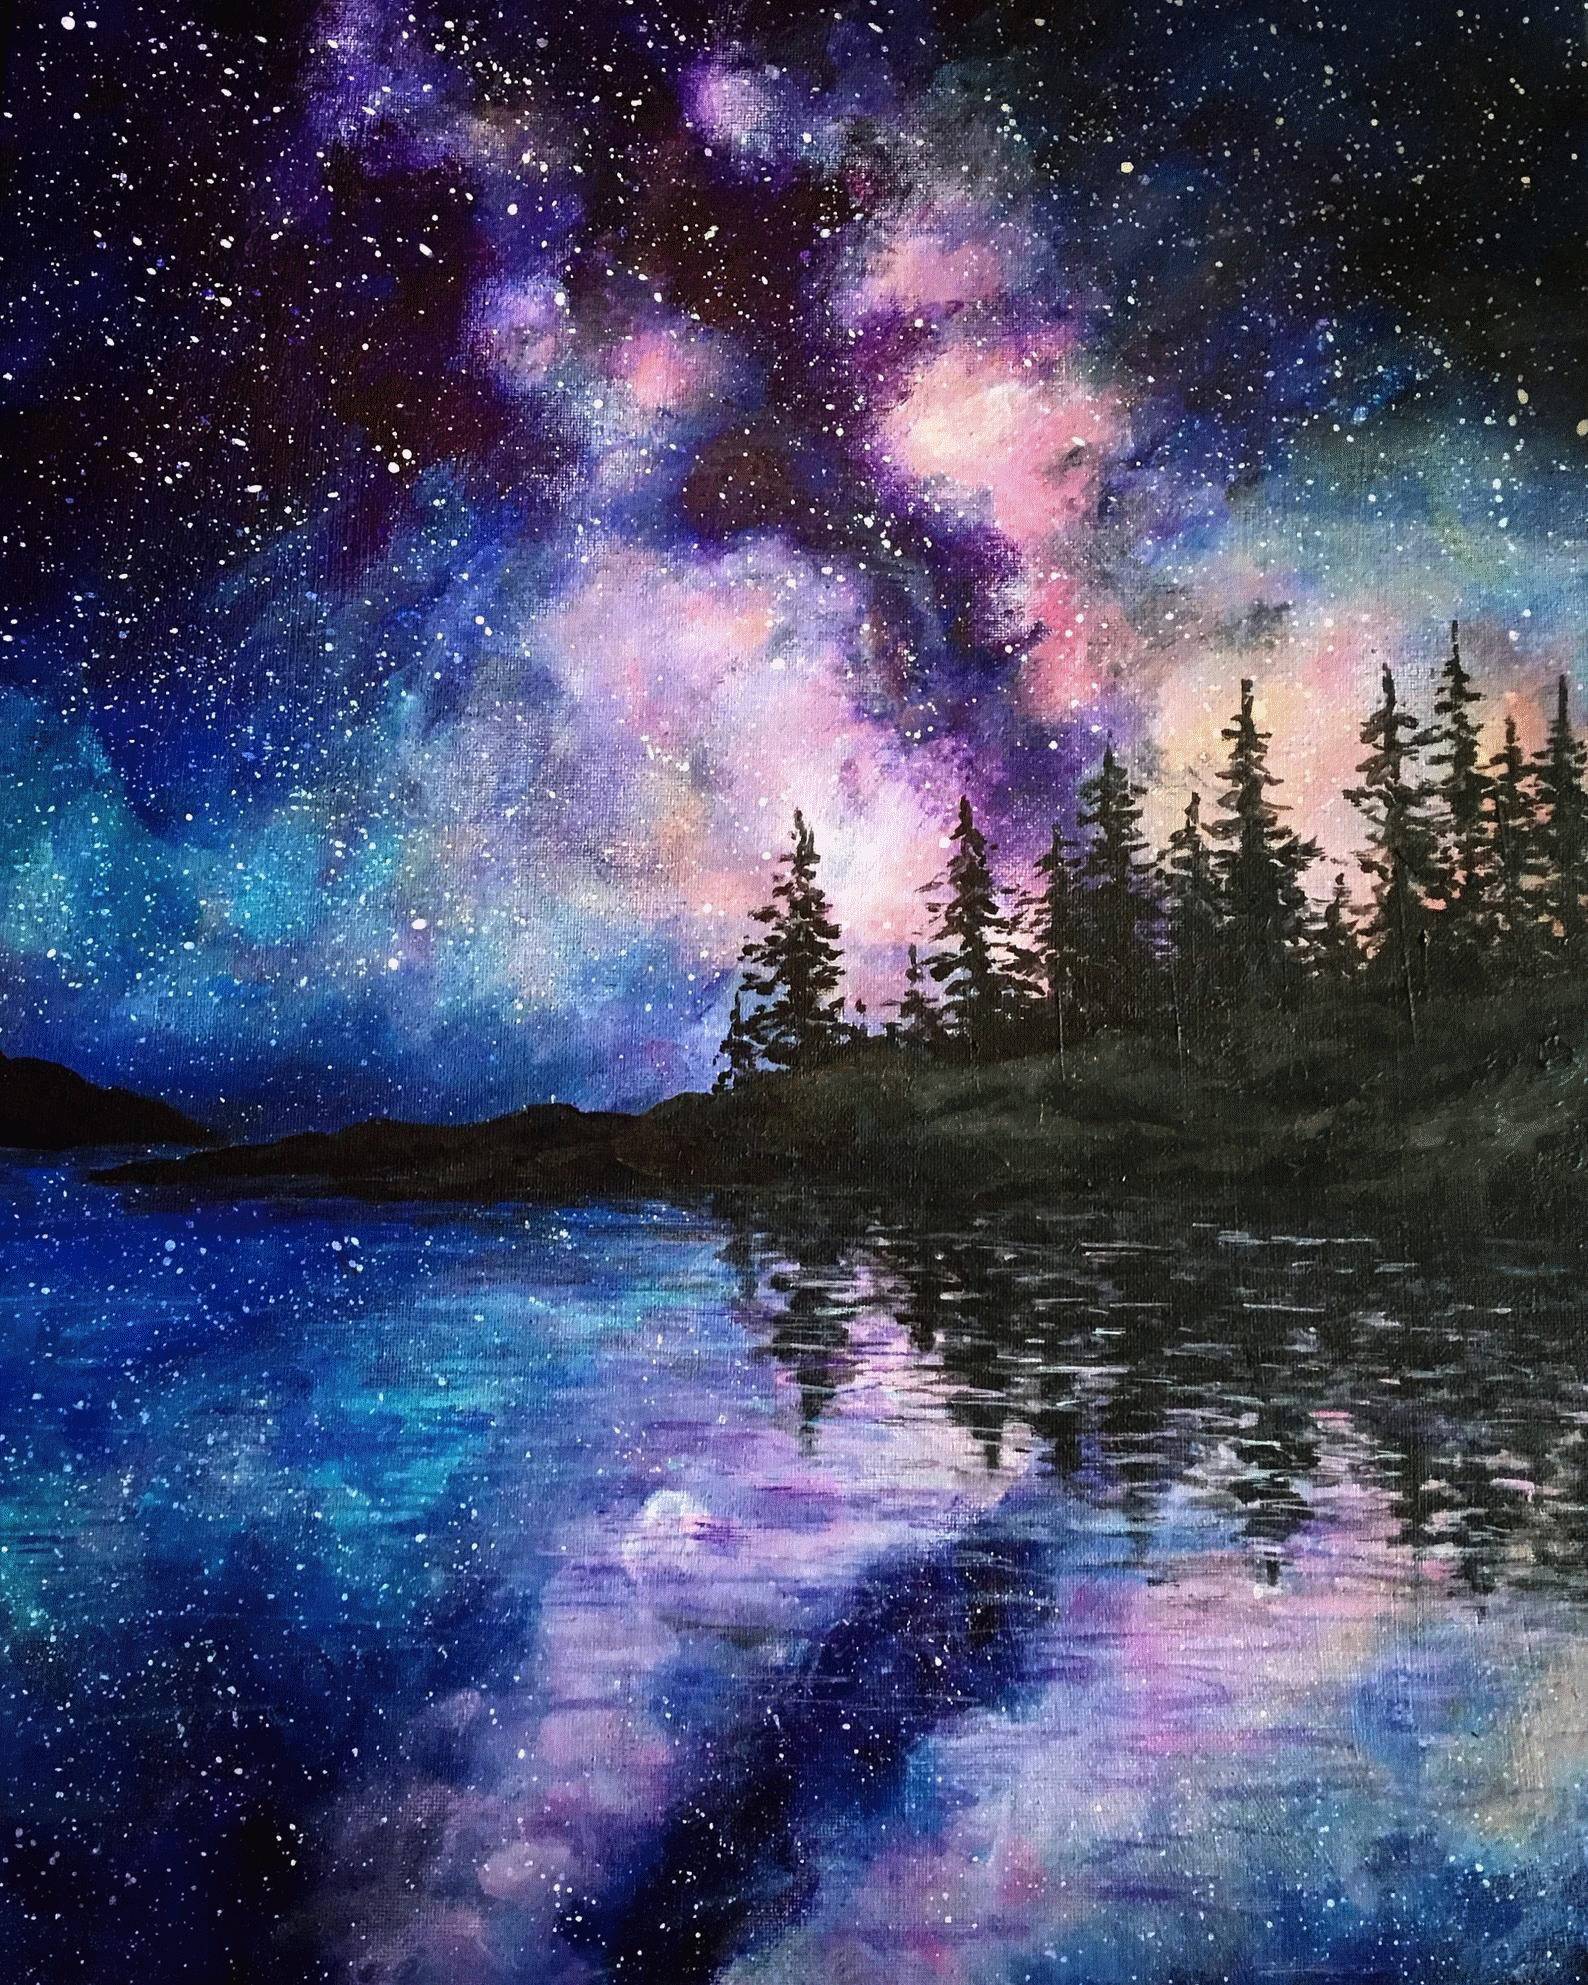 acrylic painting ideas for beginners galaxy lake map of the milky way medium